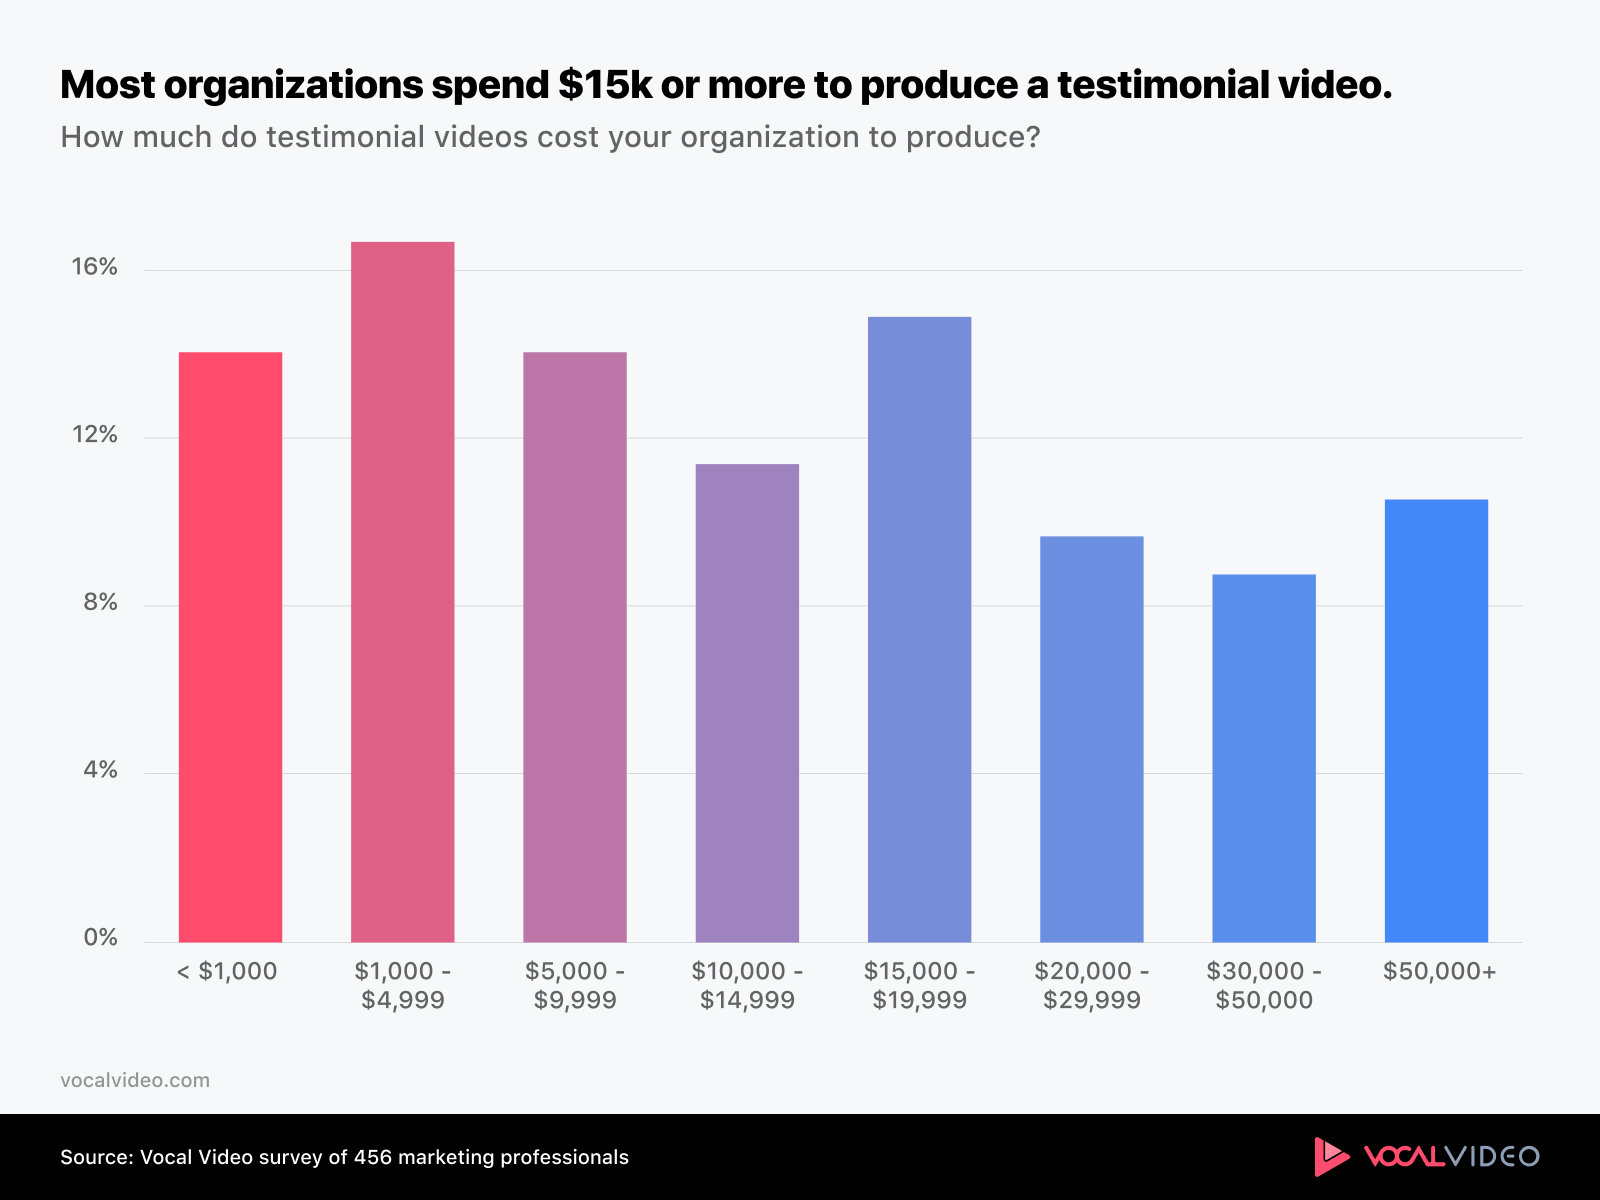 Most organizations spend $15K or more to produce a testimonial video.